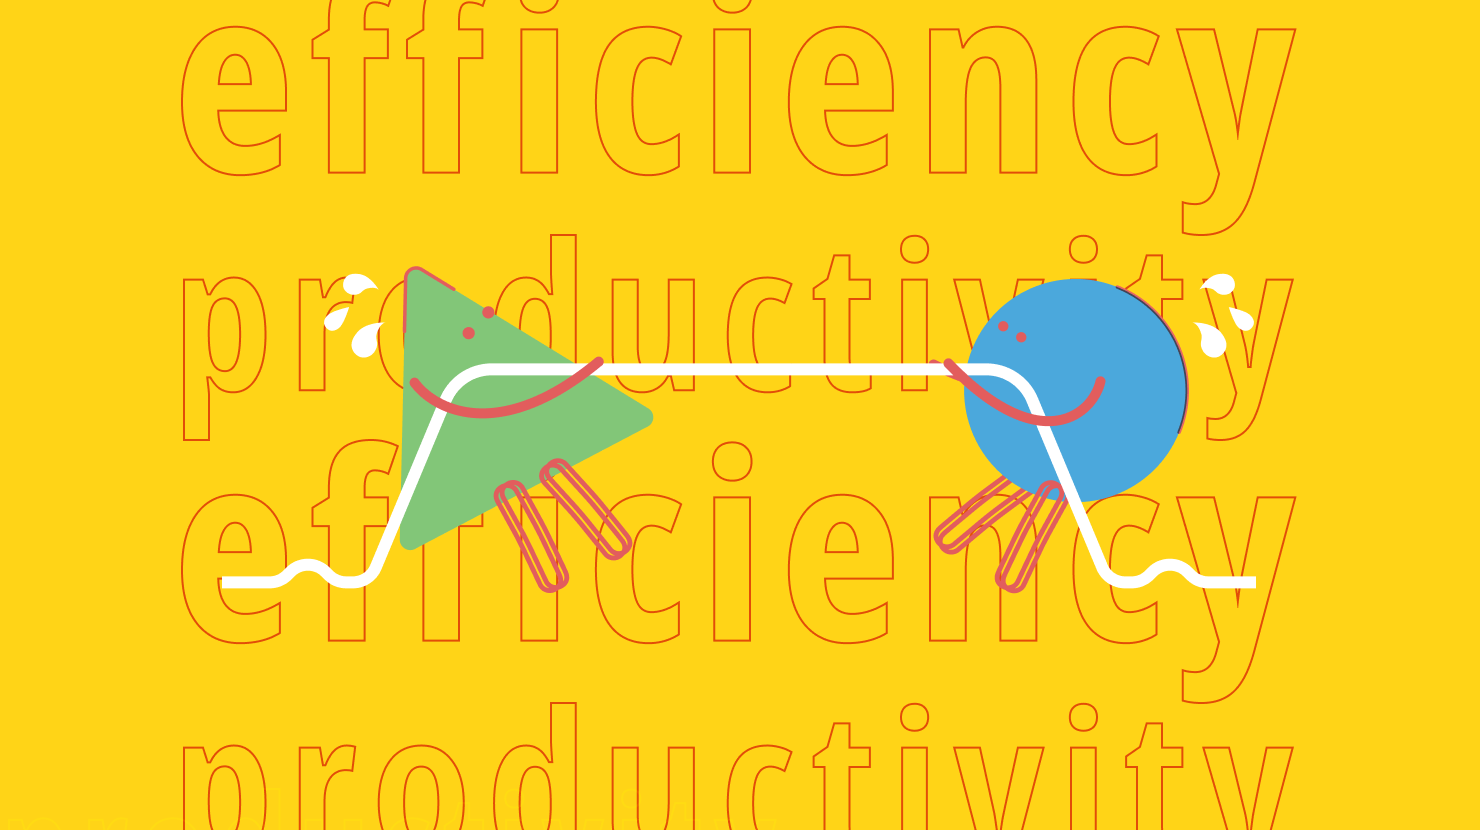 Productivity vs efficiency: what's the difference?